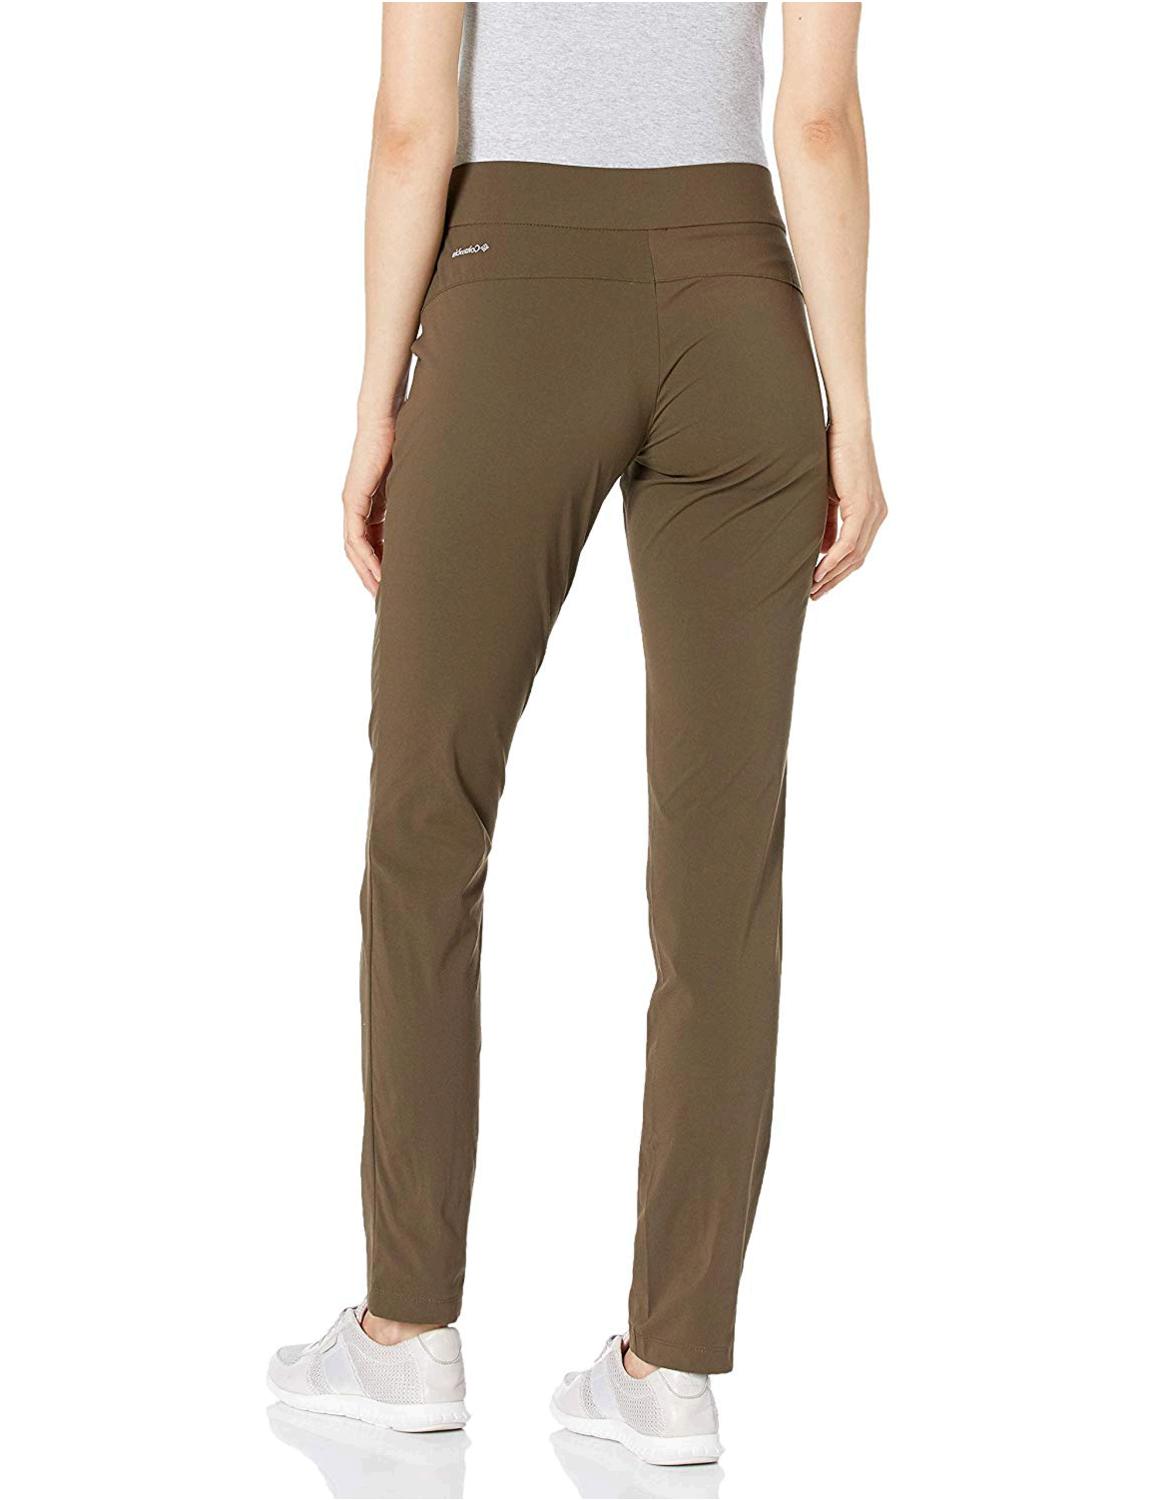 Columbia Women's Anytime Casual Pull On Pant,, Olive Green, Size Medium ...